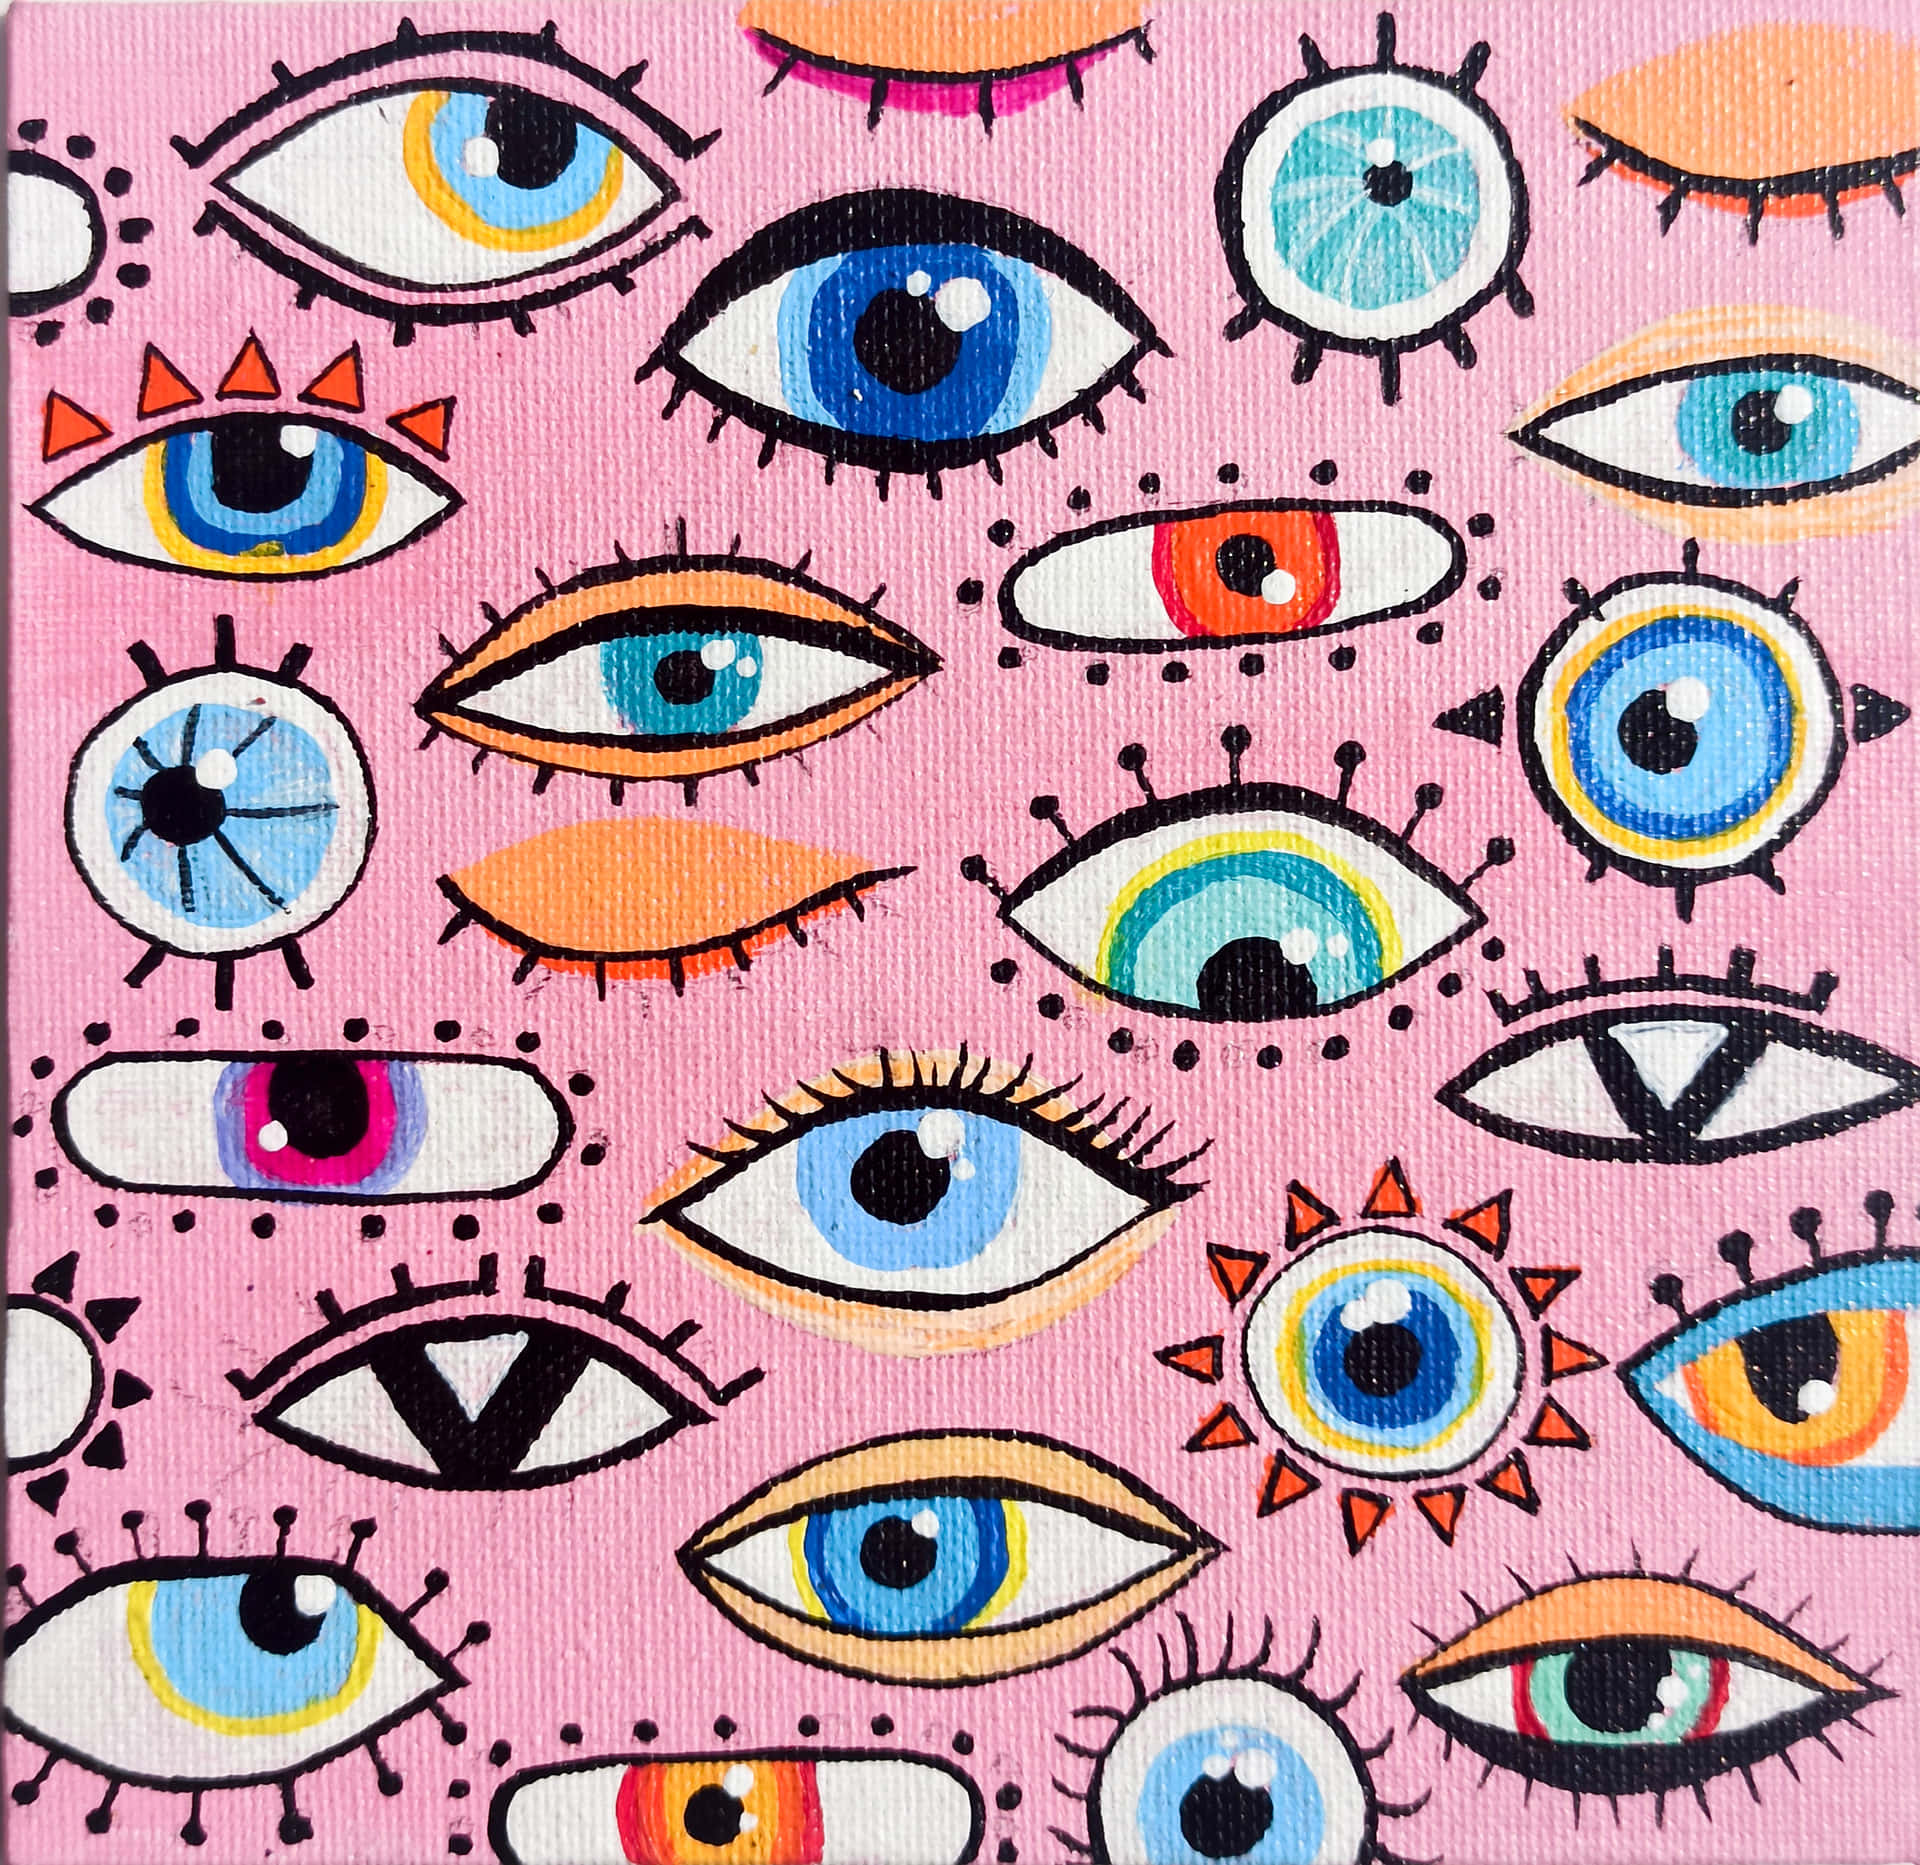 A Painting Of Many Colorful Eyes On Pink